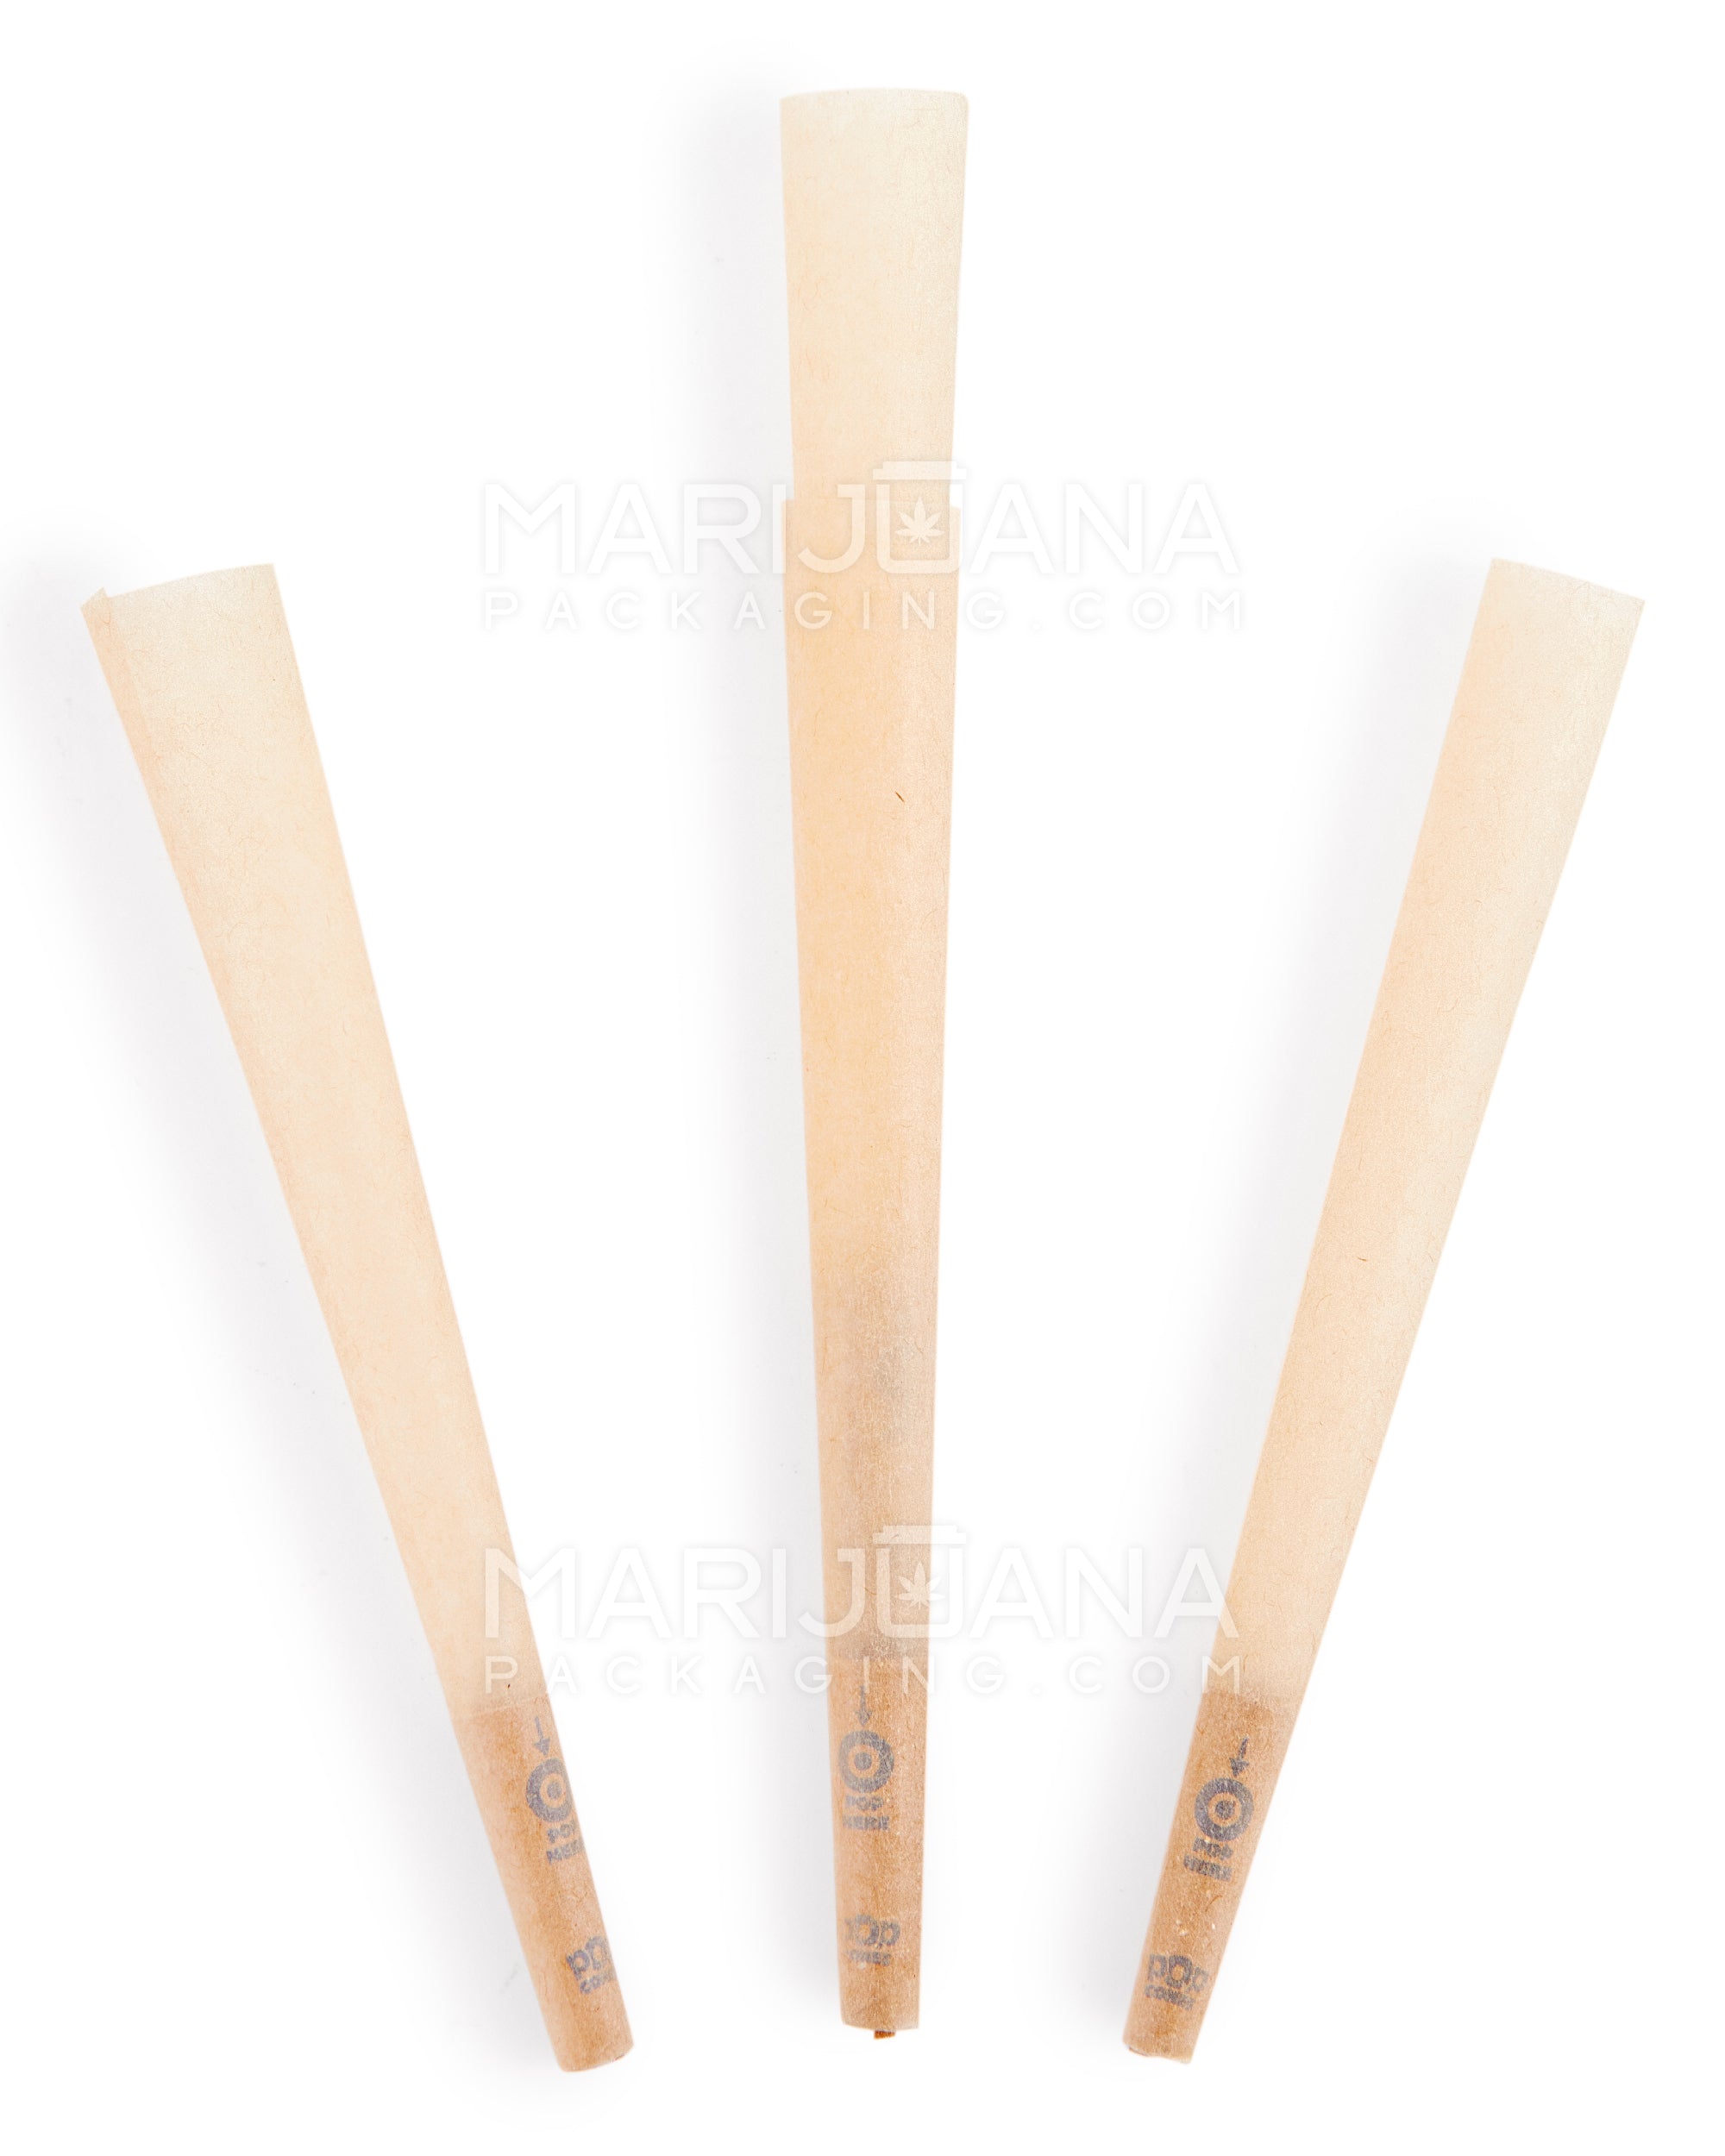 POP CONES | King Size Unbleached Pre-Rolled Cones | 109mm - Banana Cream - 400 Count - 4